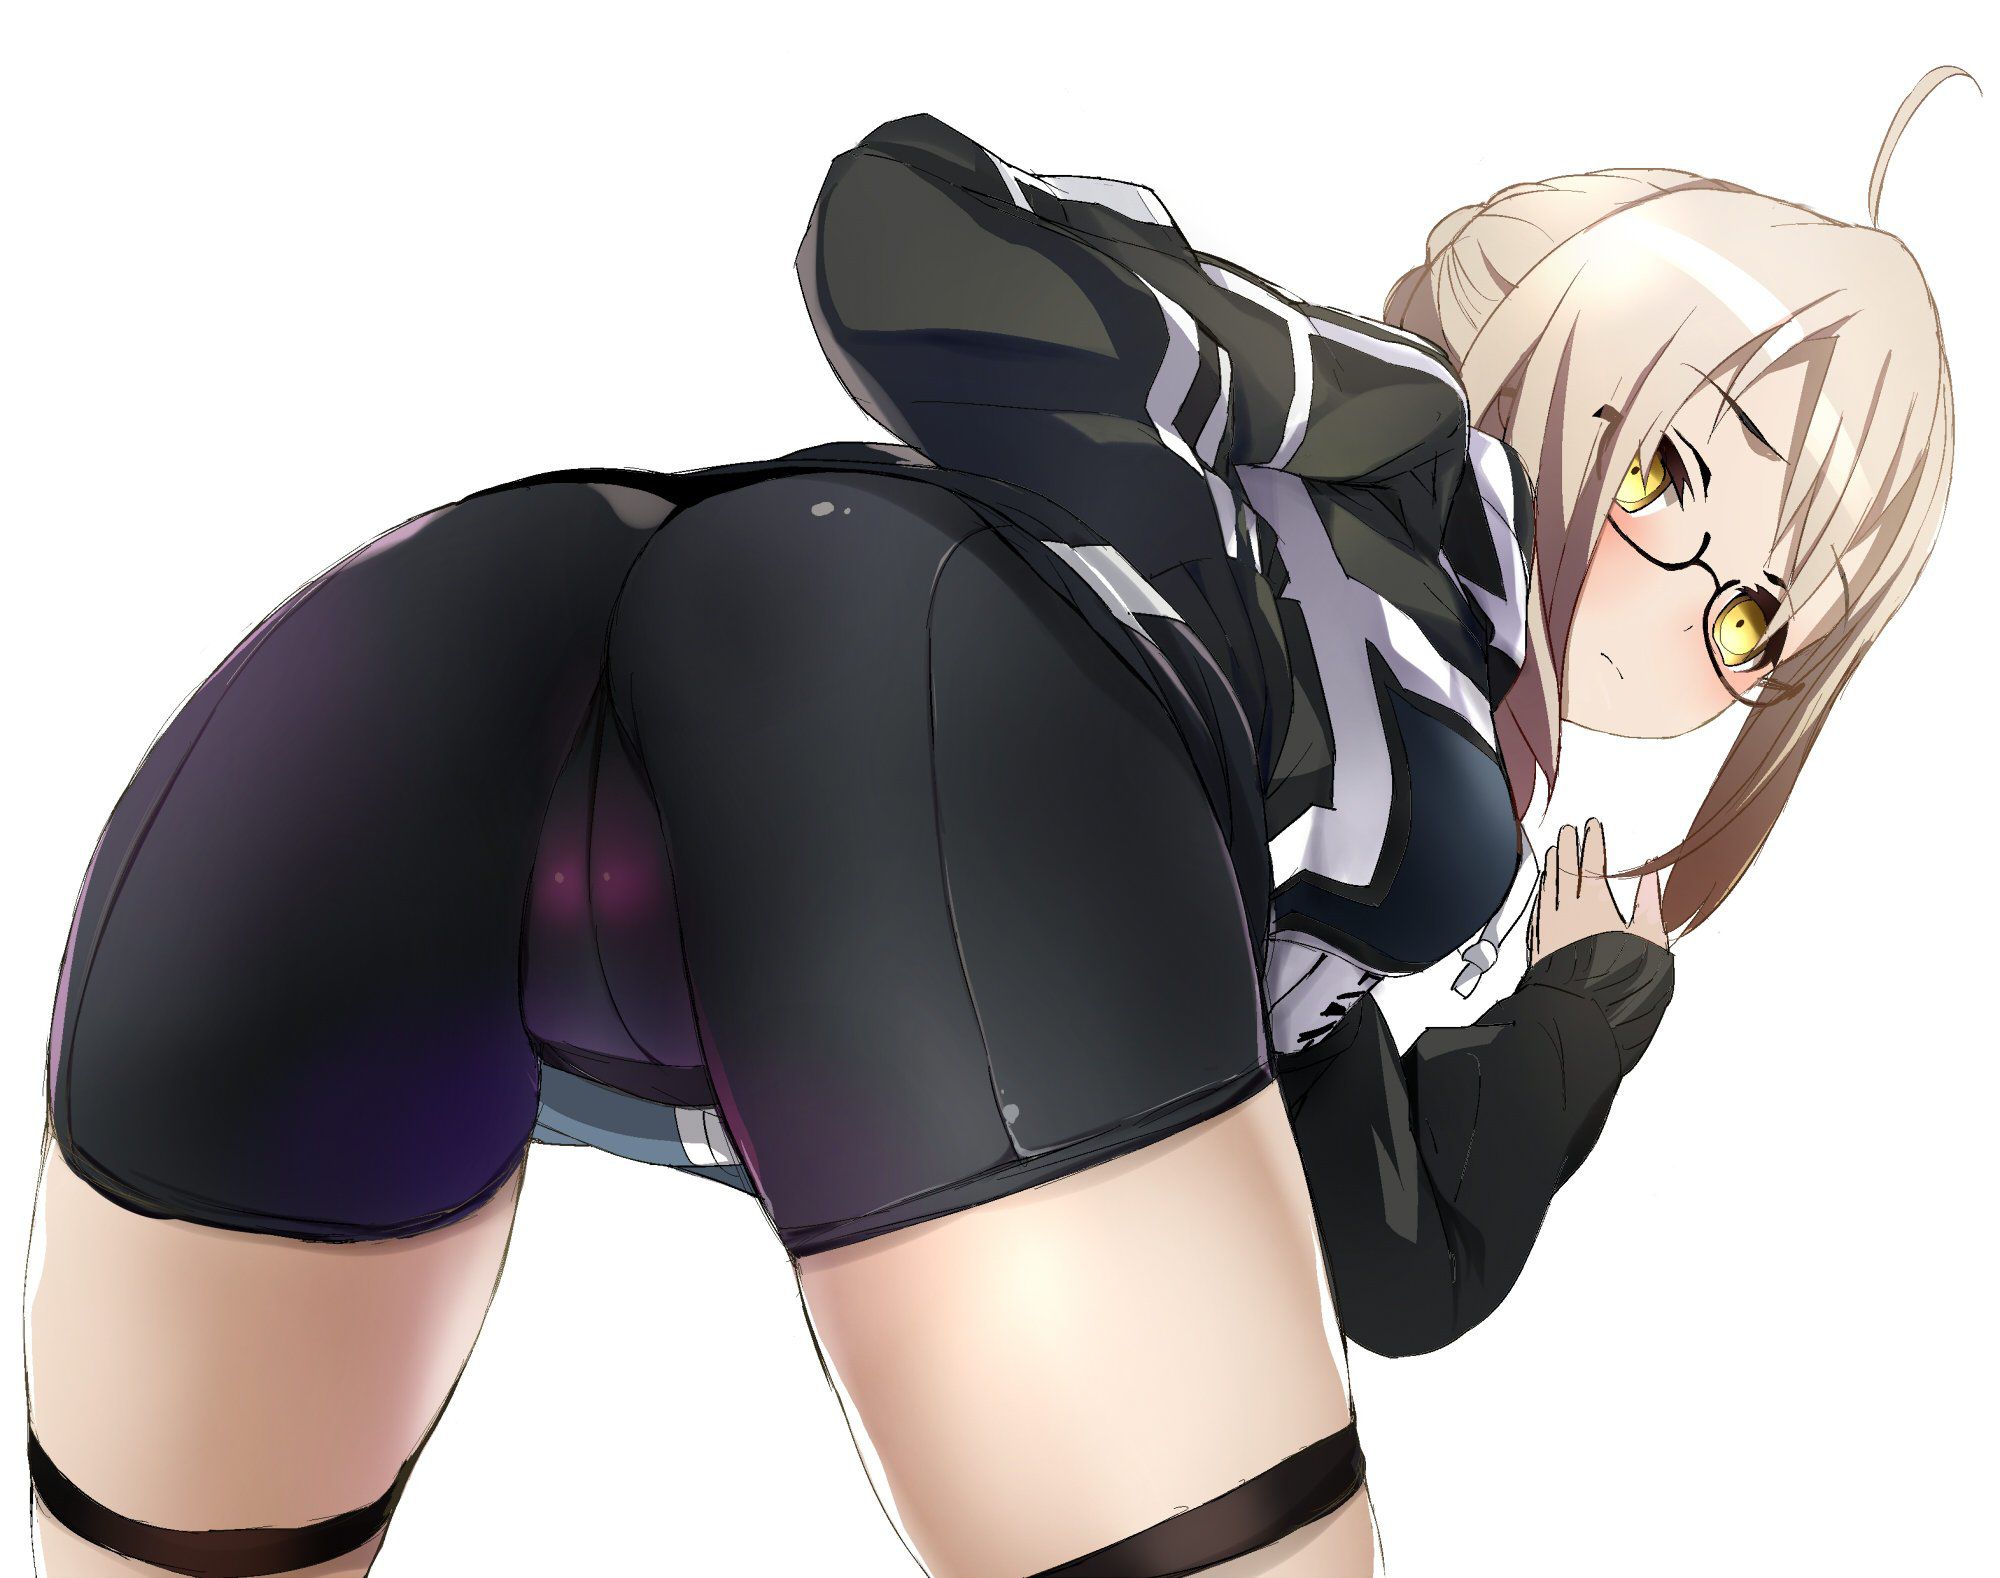 [Secondary] The second erotic image of a girl that spats is in close contact with the pitChile in the lower body of the 17 [spats] 17